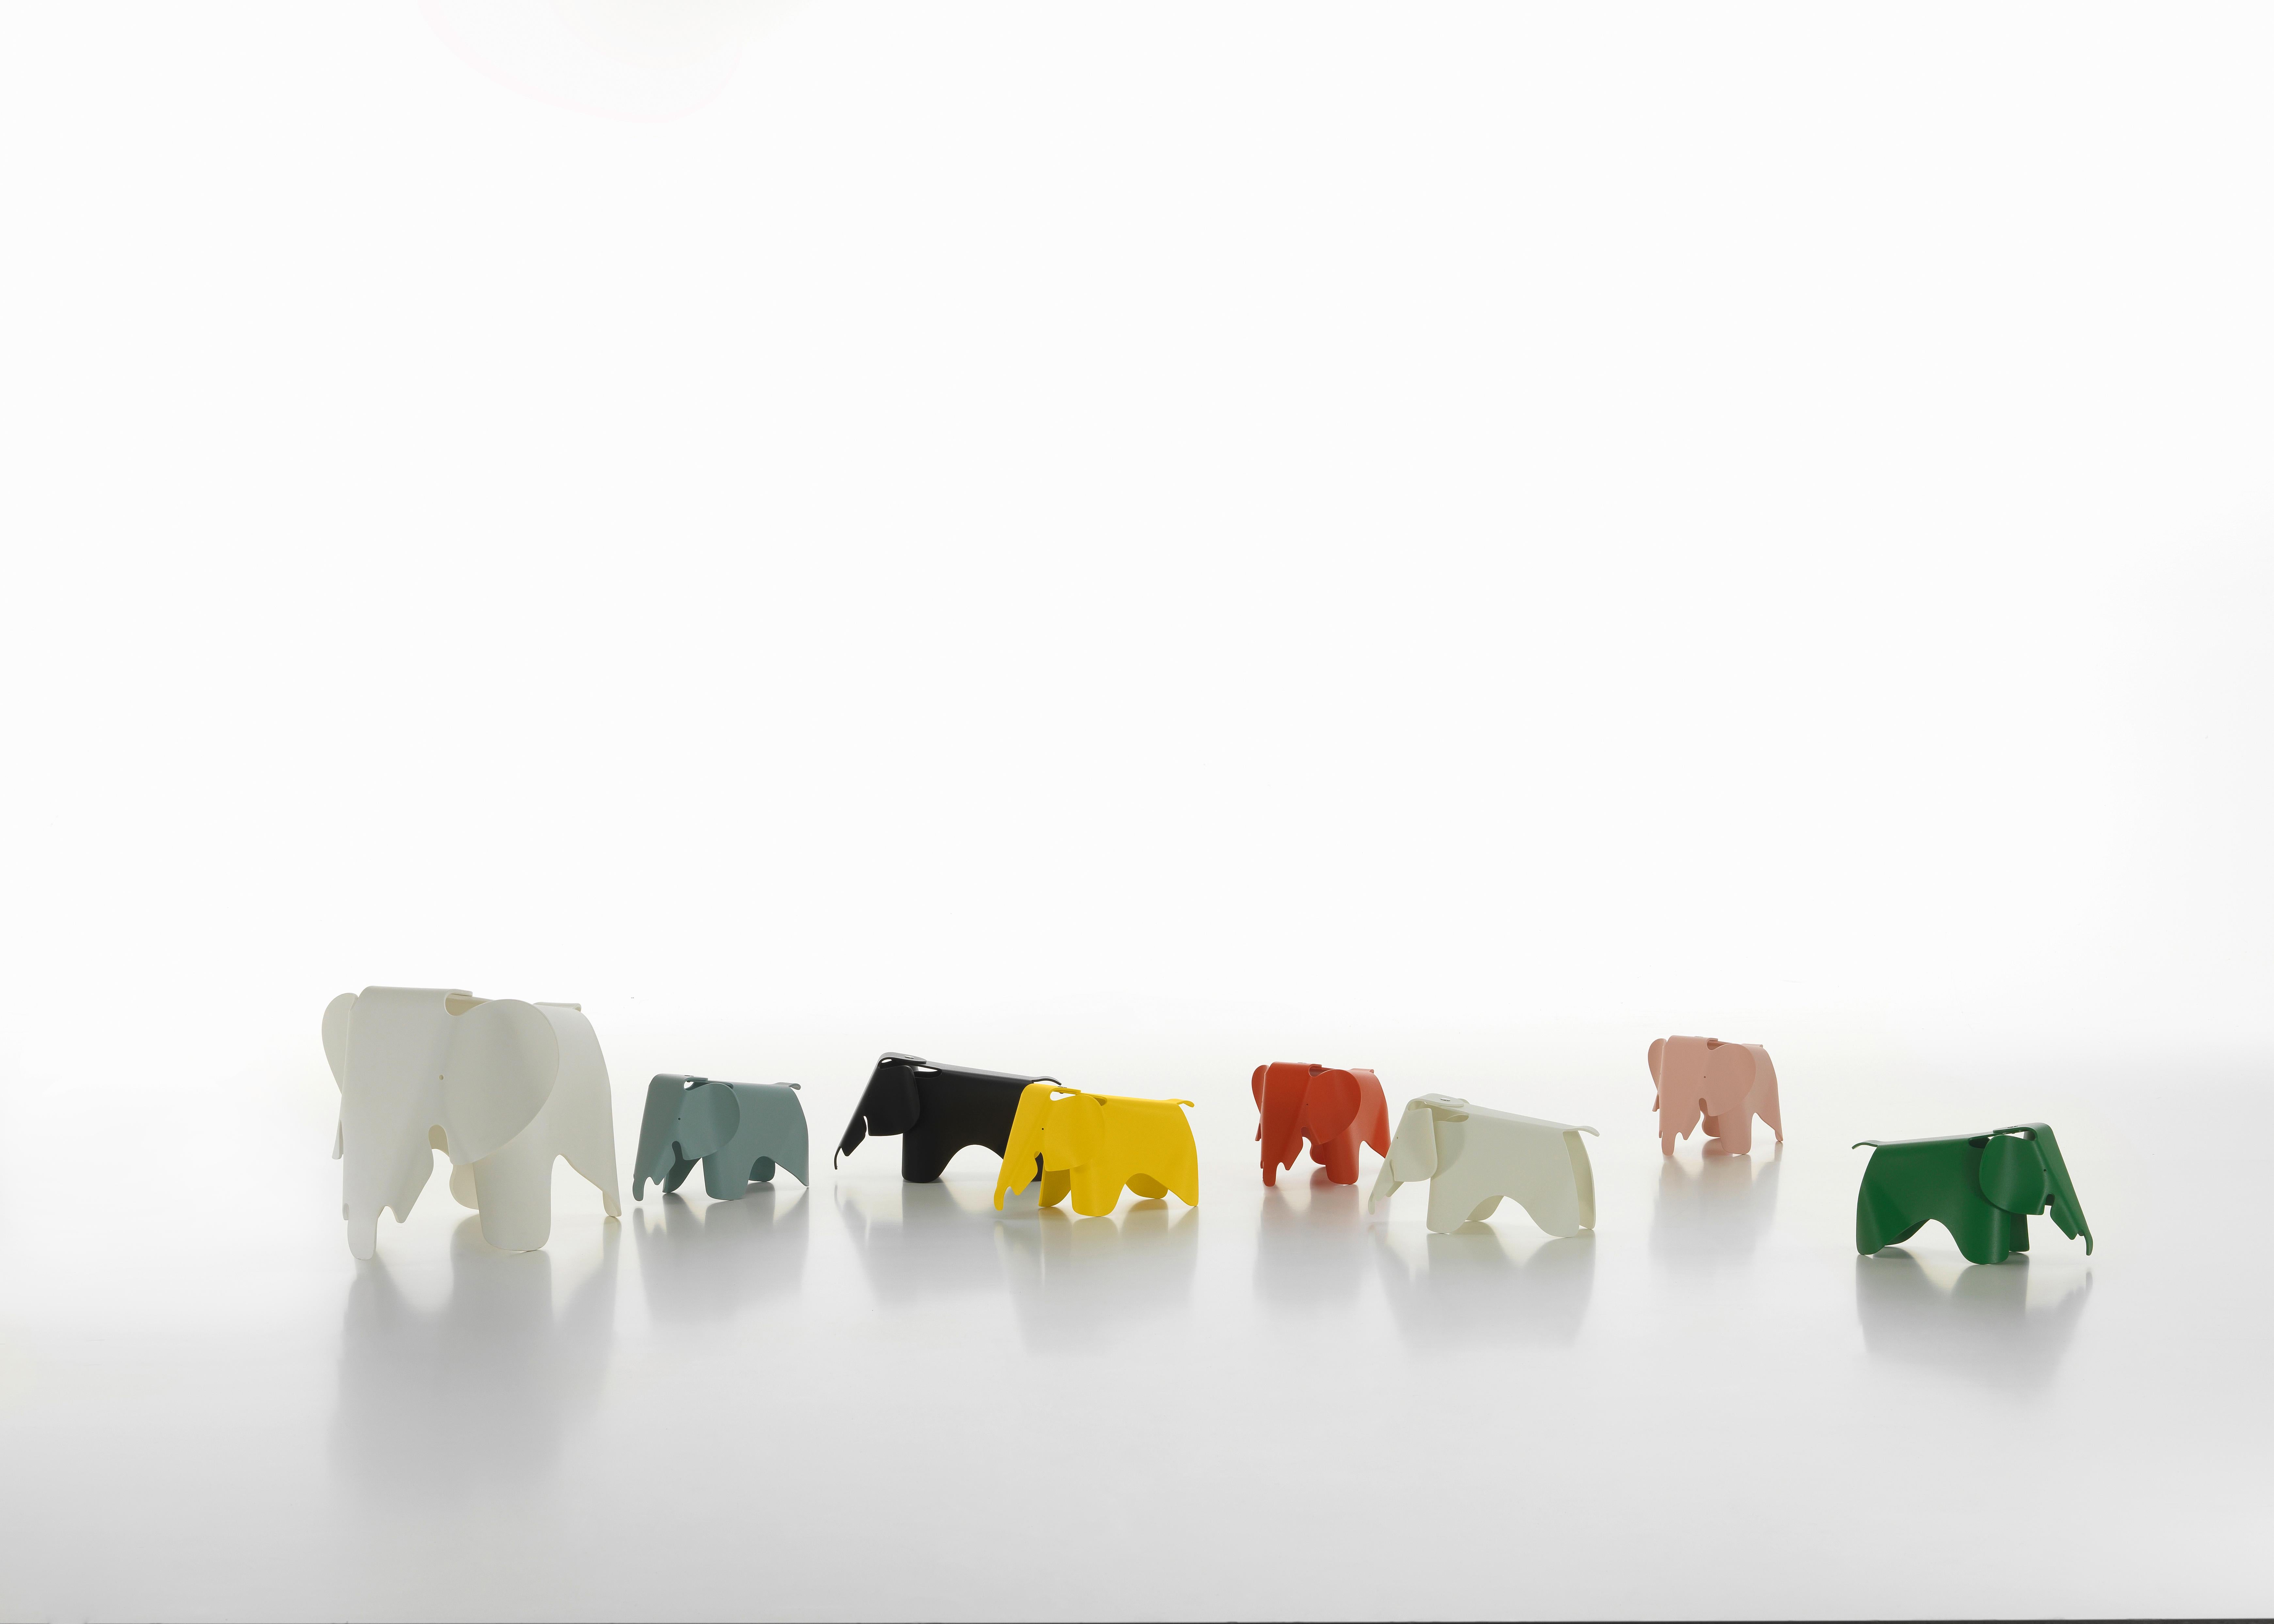 These items are currently only available in the United States.

Charles & Ray Eames developed a toy elephant made of plywood in 1945; however, this piece never went into production. A scaled-down version, the Eames Elephant (small) made of robust